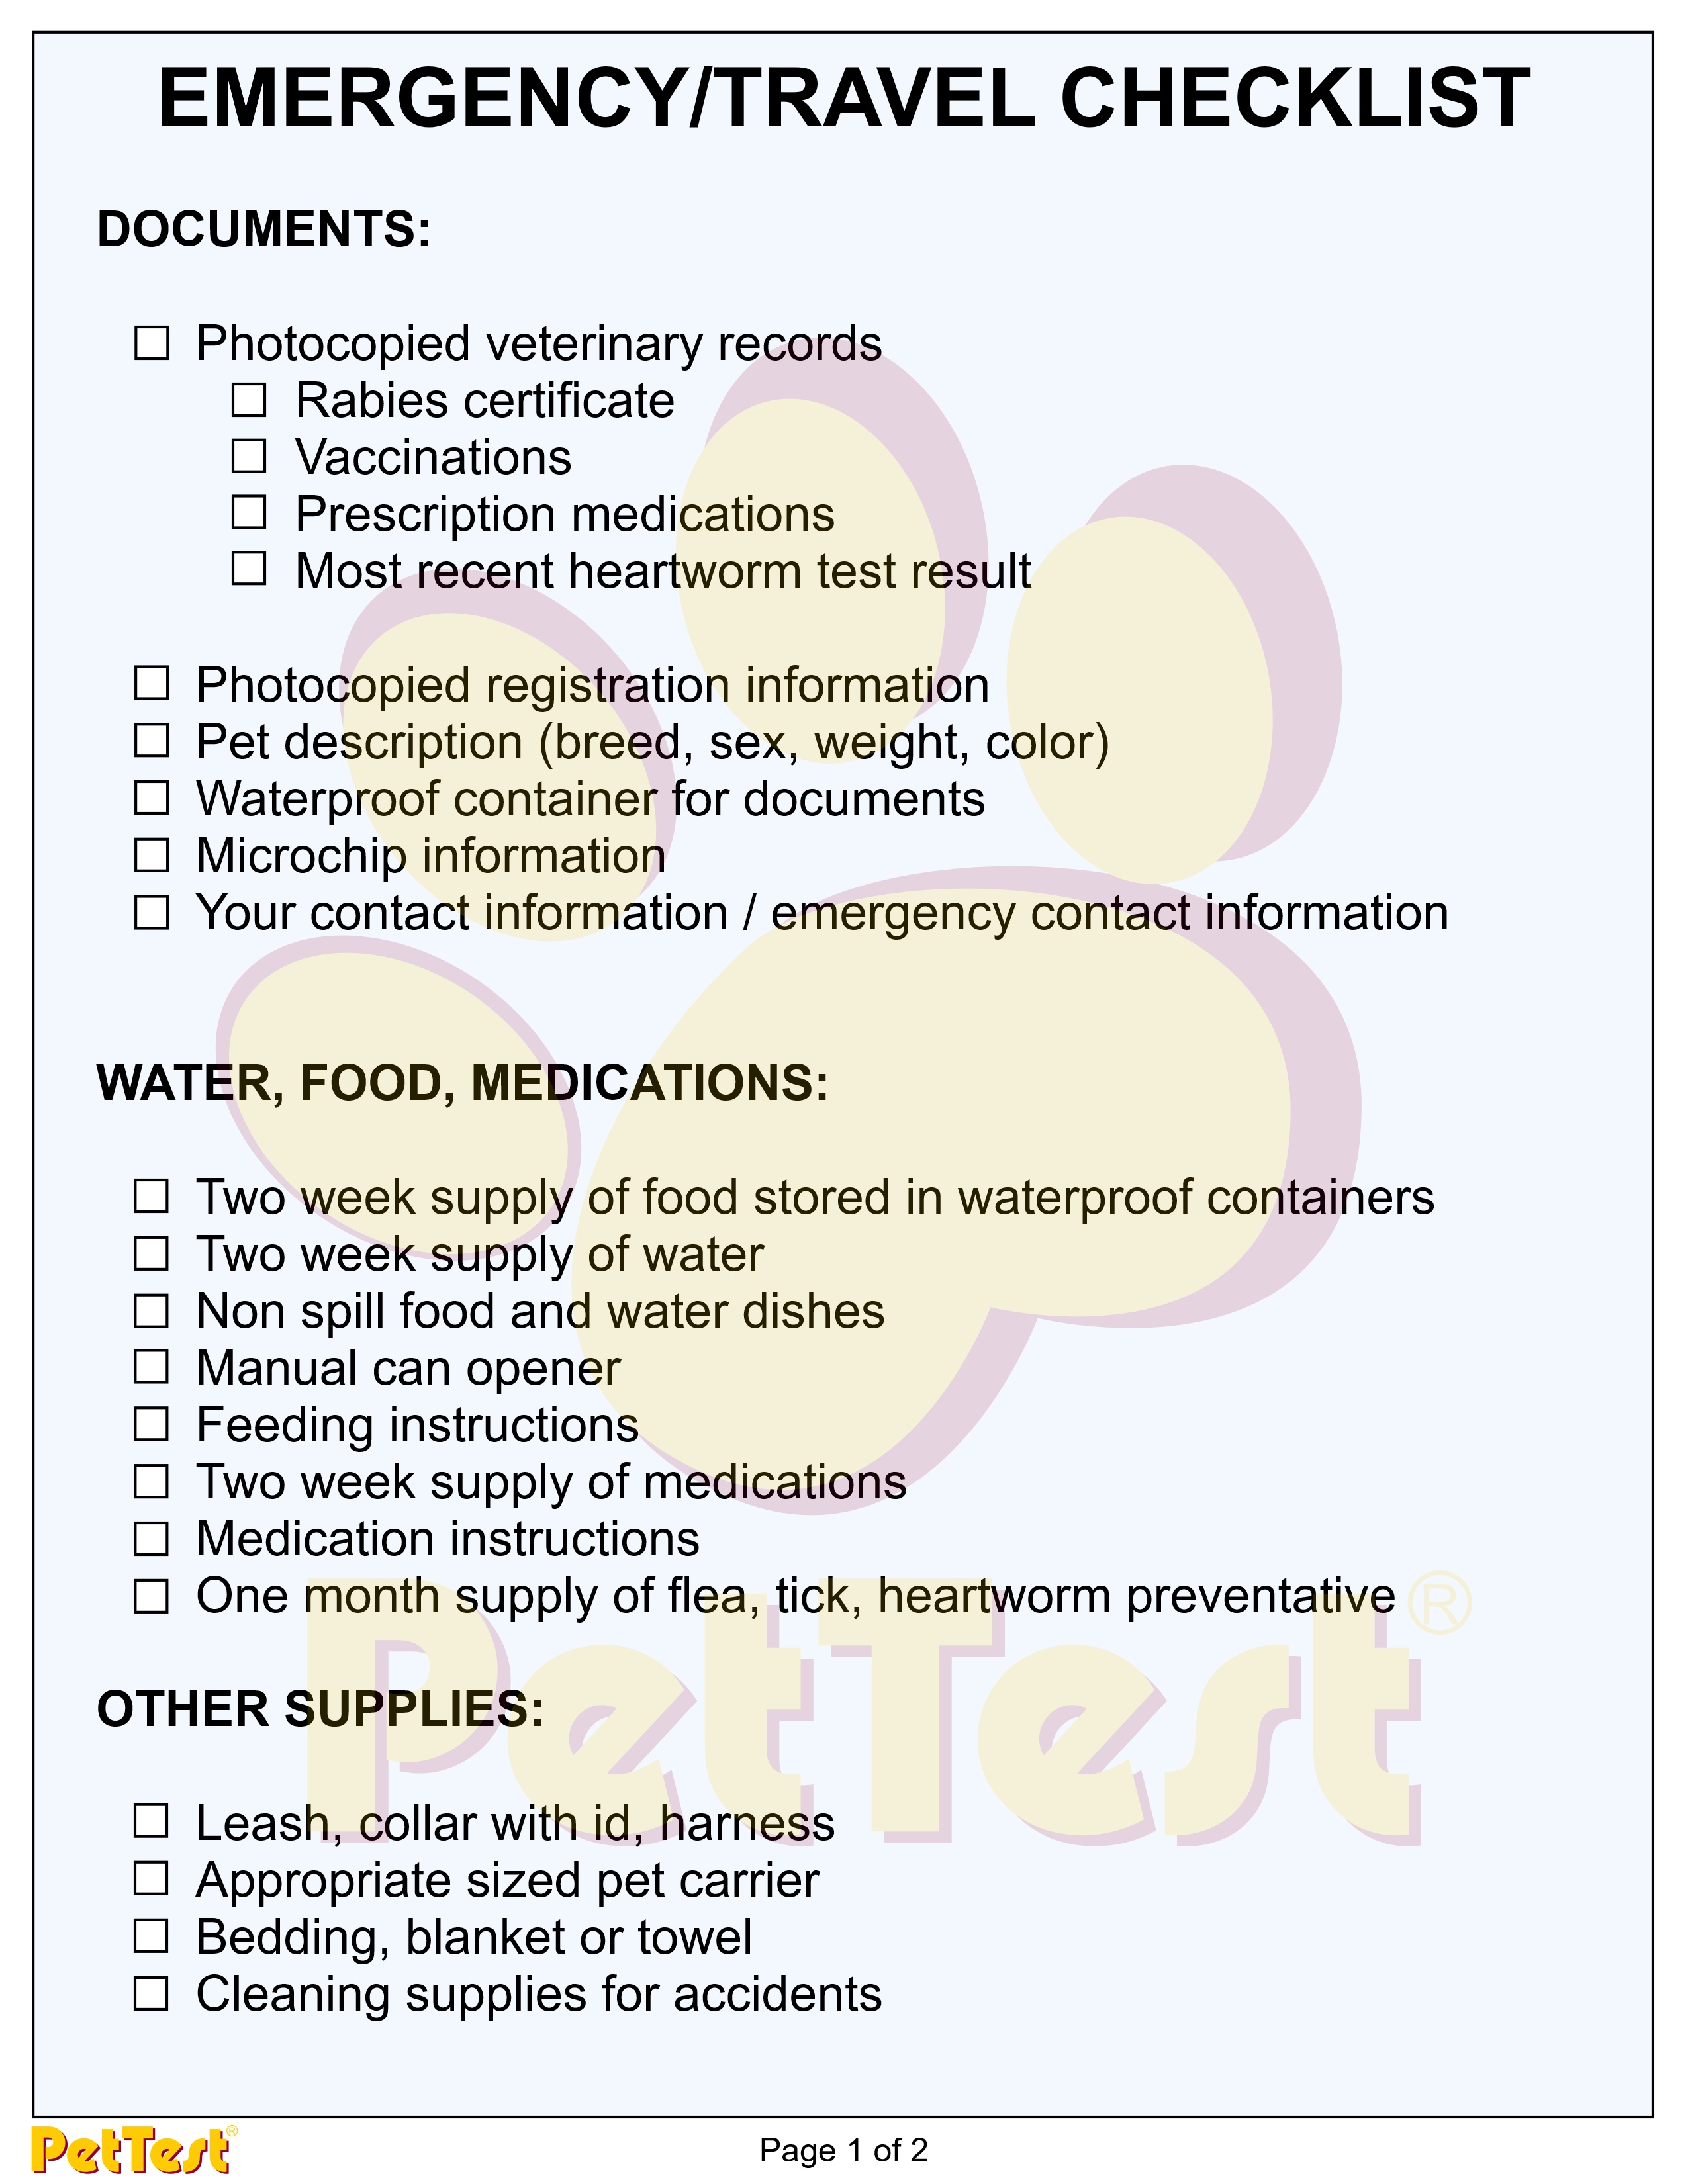 Being Prepared for an Emergency or Natural Disaster Checklist 1